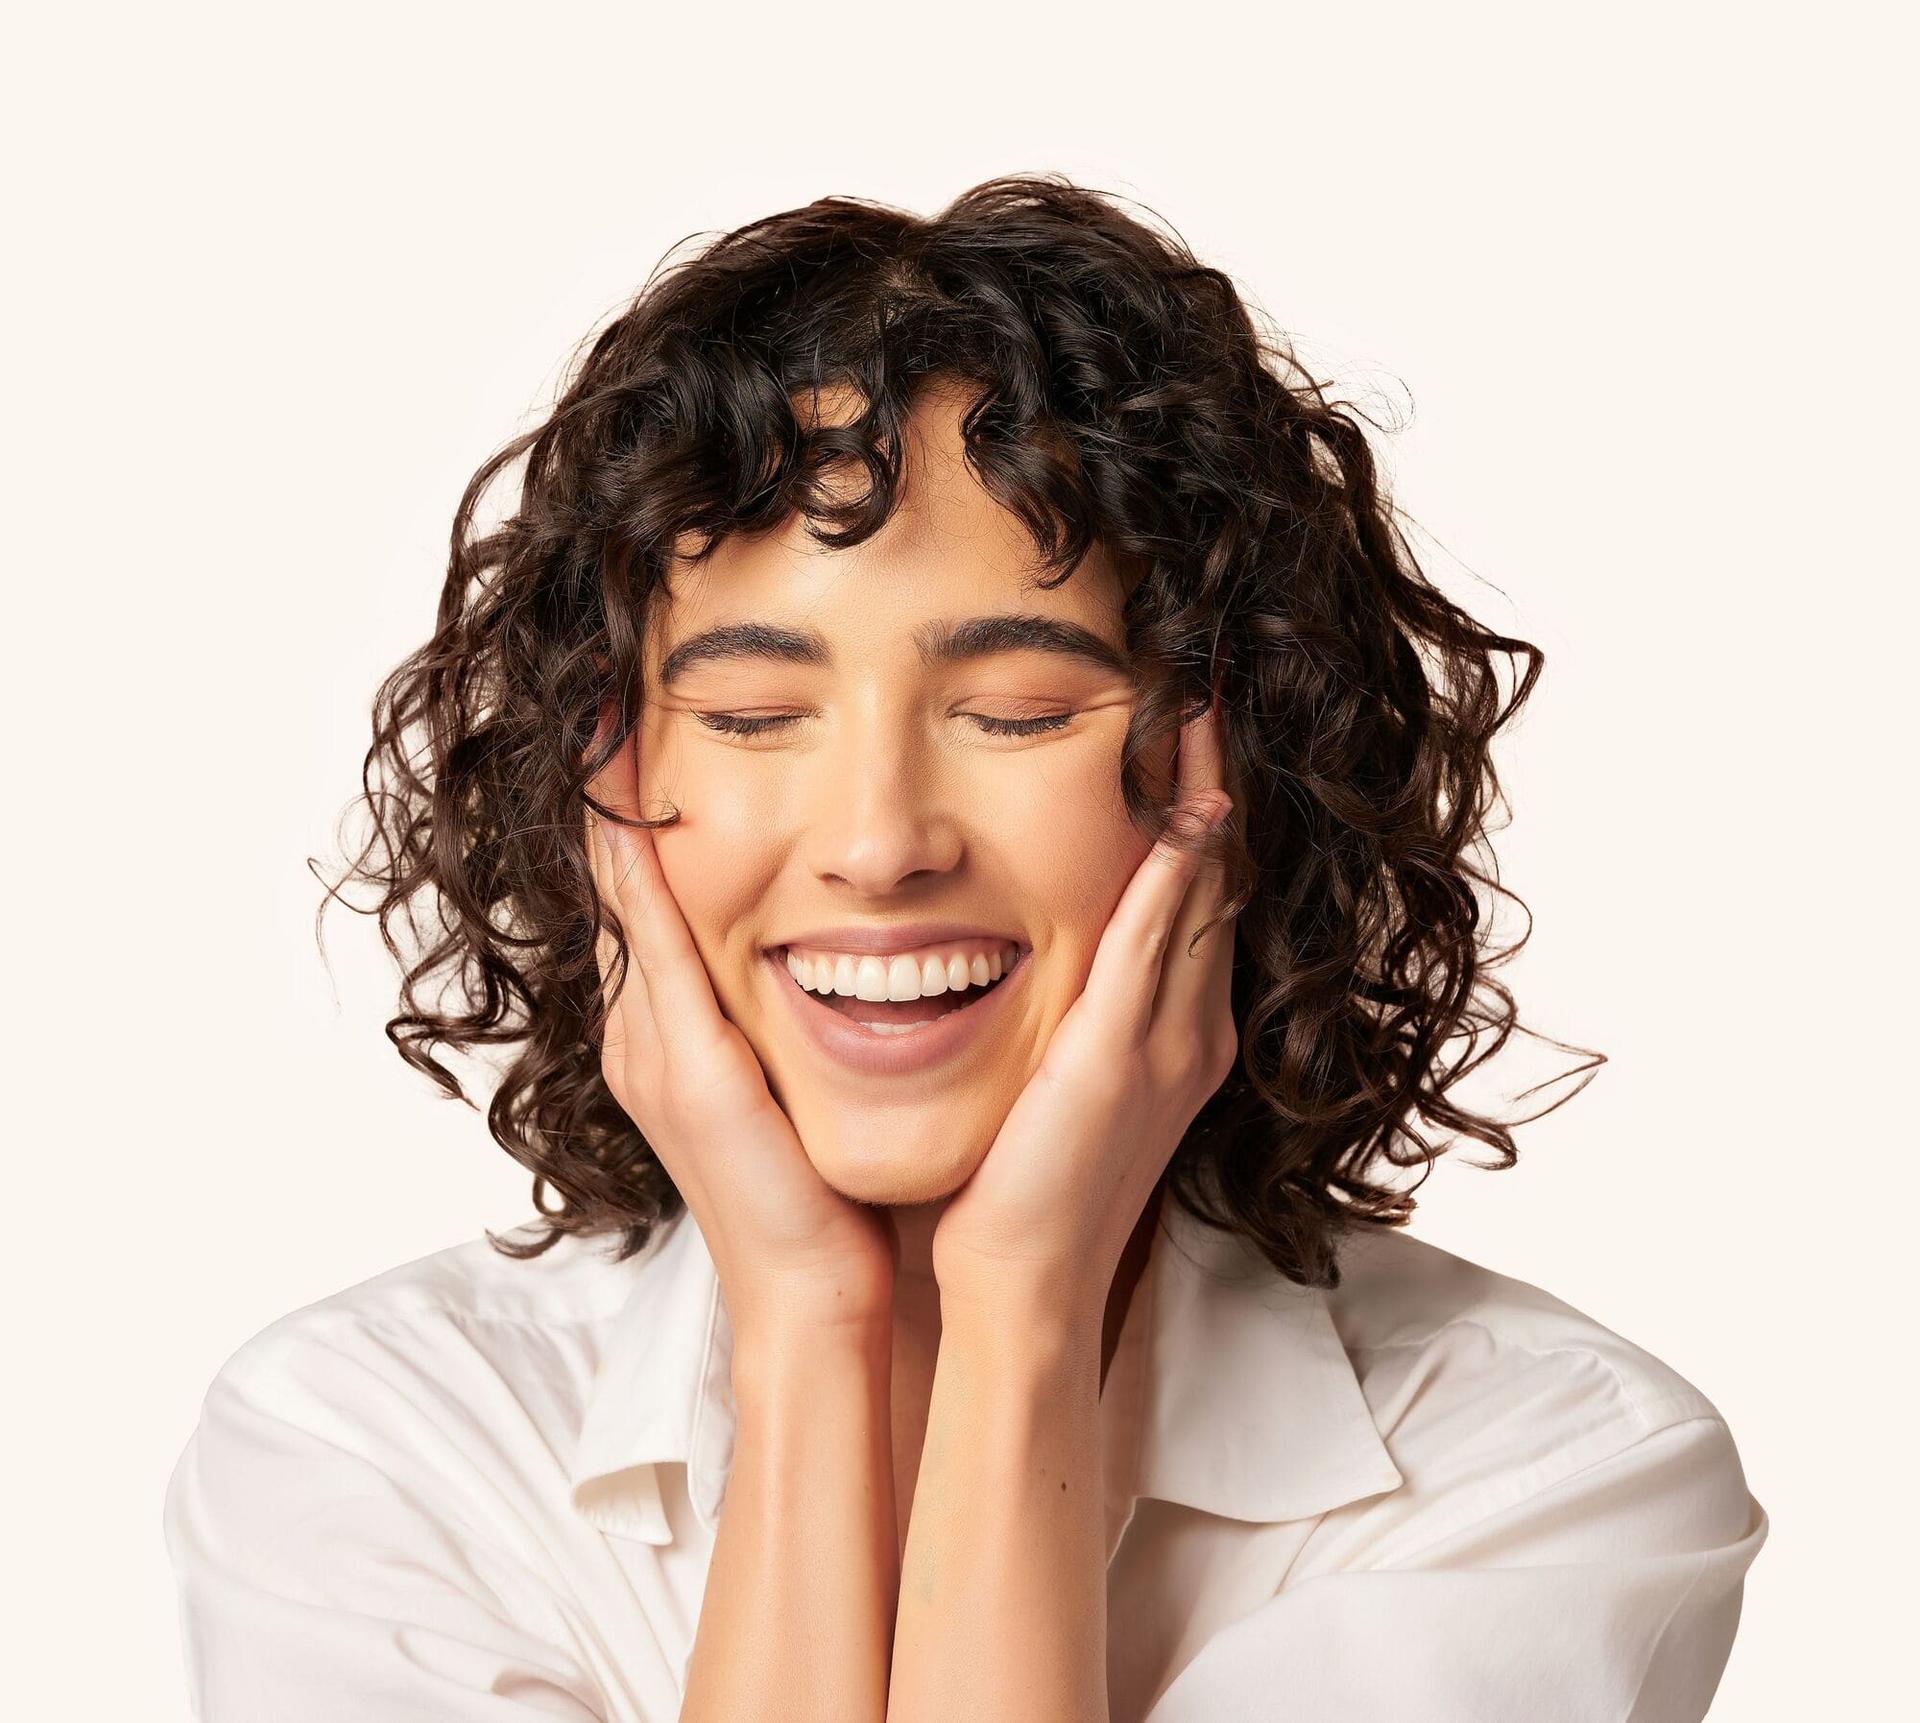 Photo of female with brunette curly hair smiling with eyes closed and hands on face